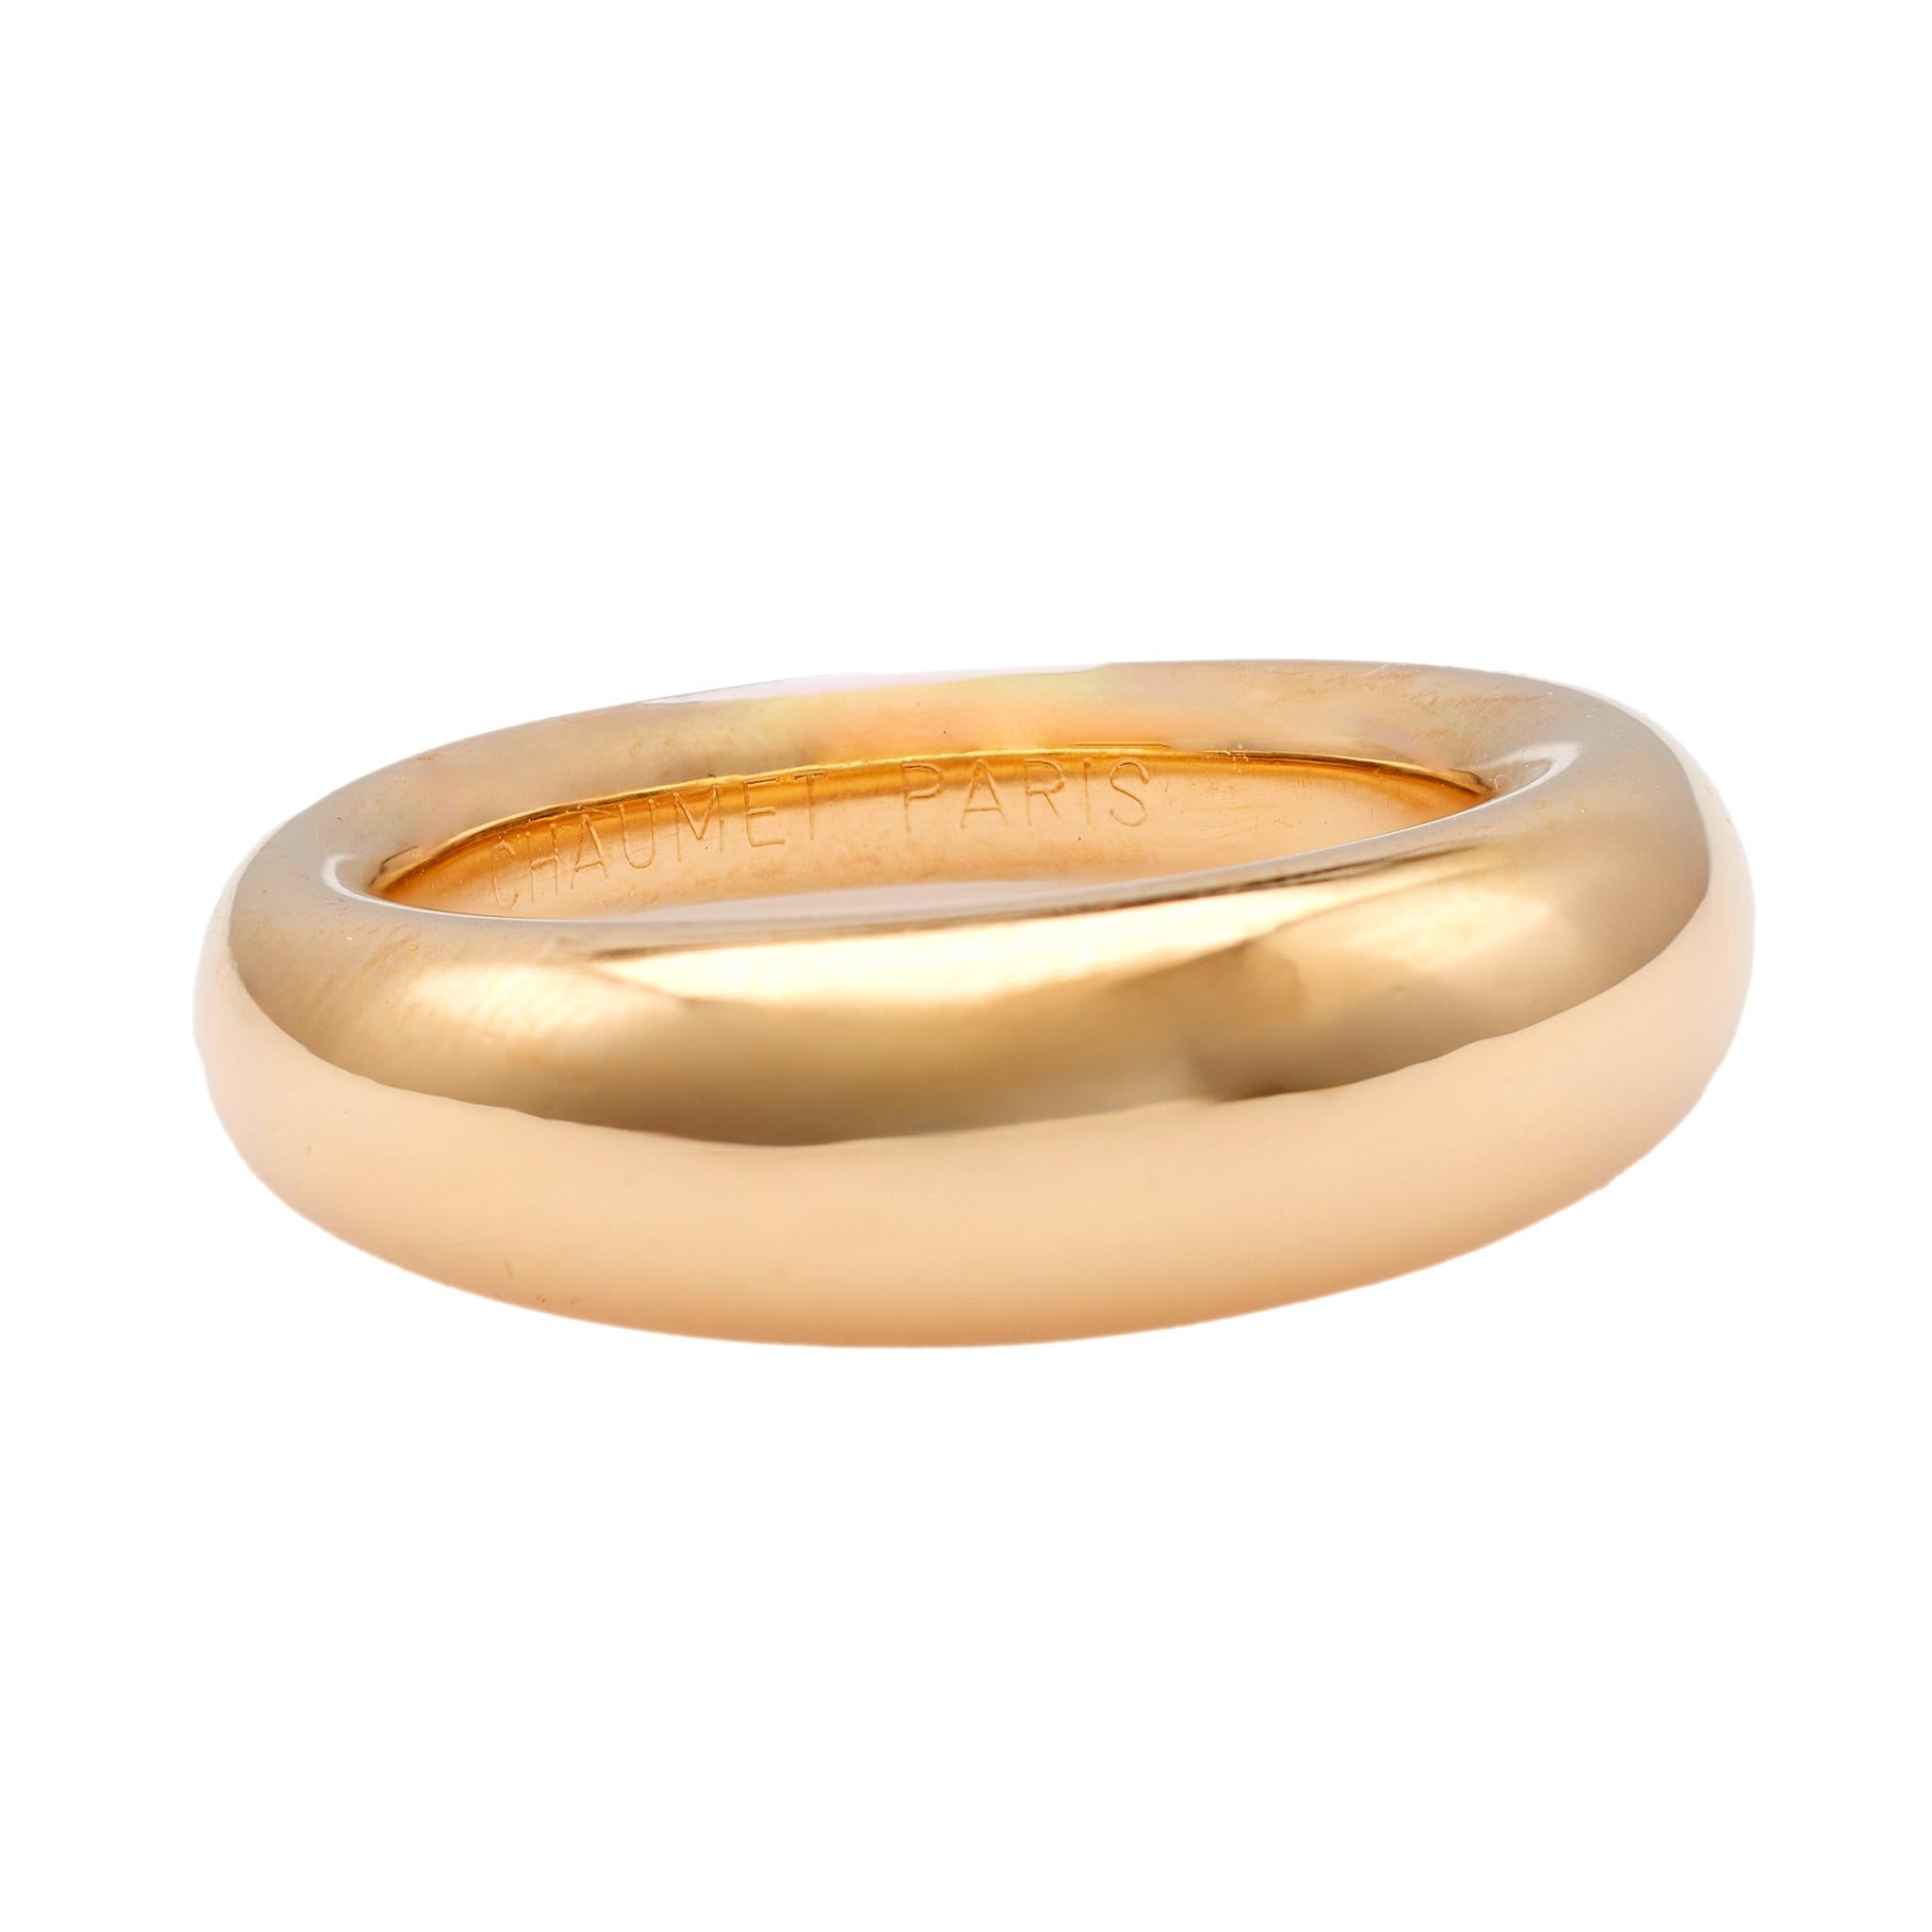 Women's or Men's Vintage Chaumet 18k Yellow Gold Anneau Dome Ring